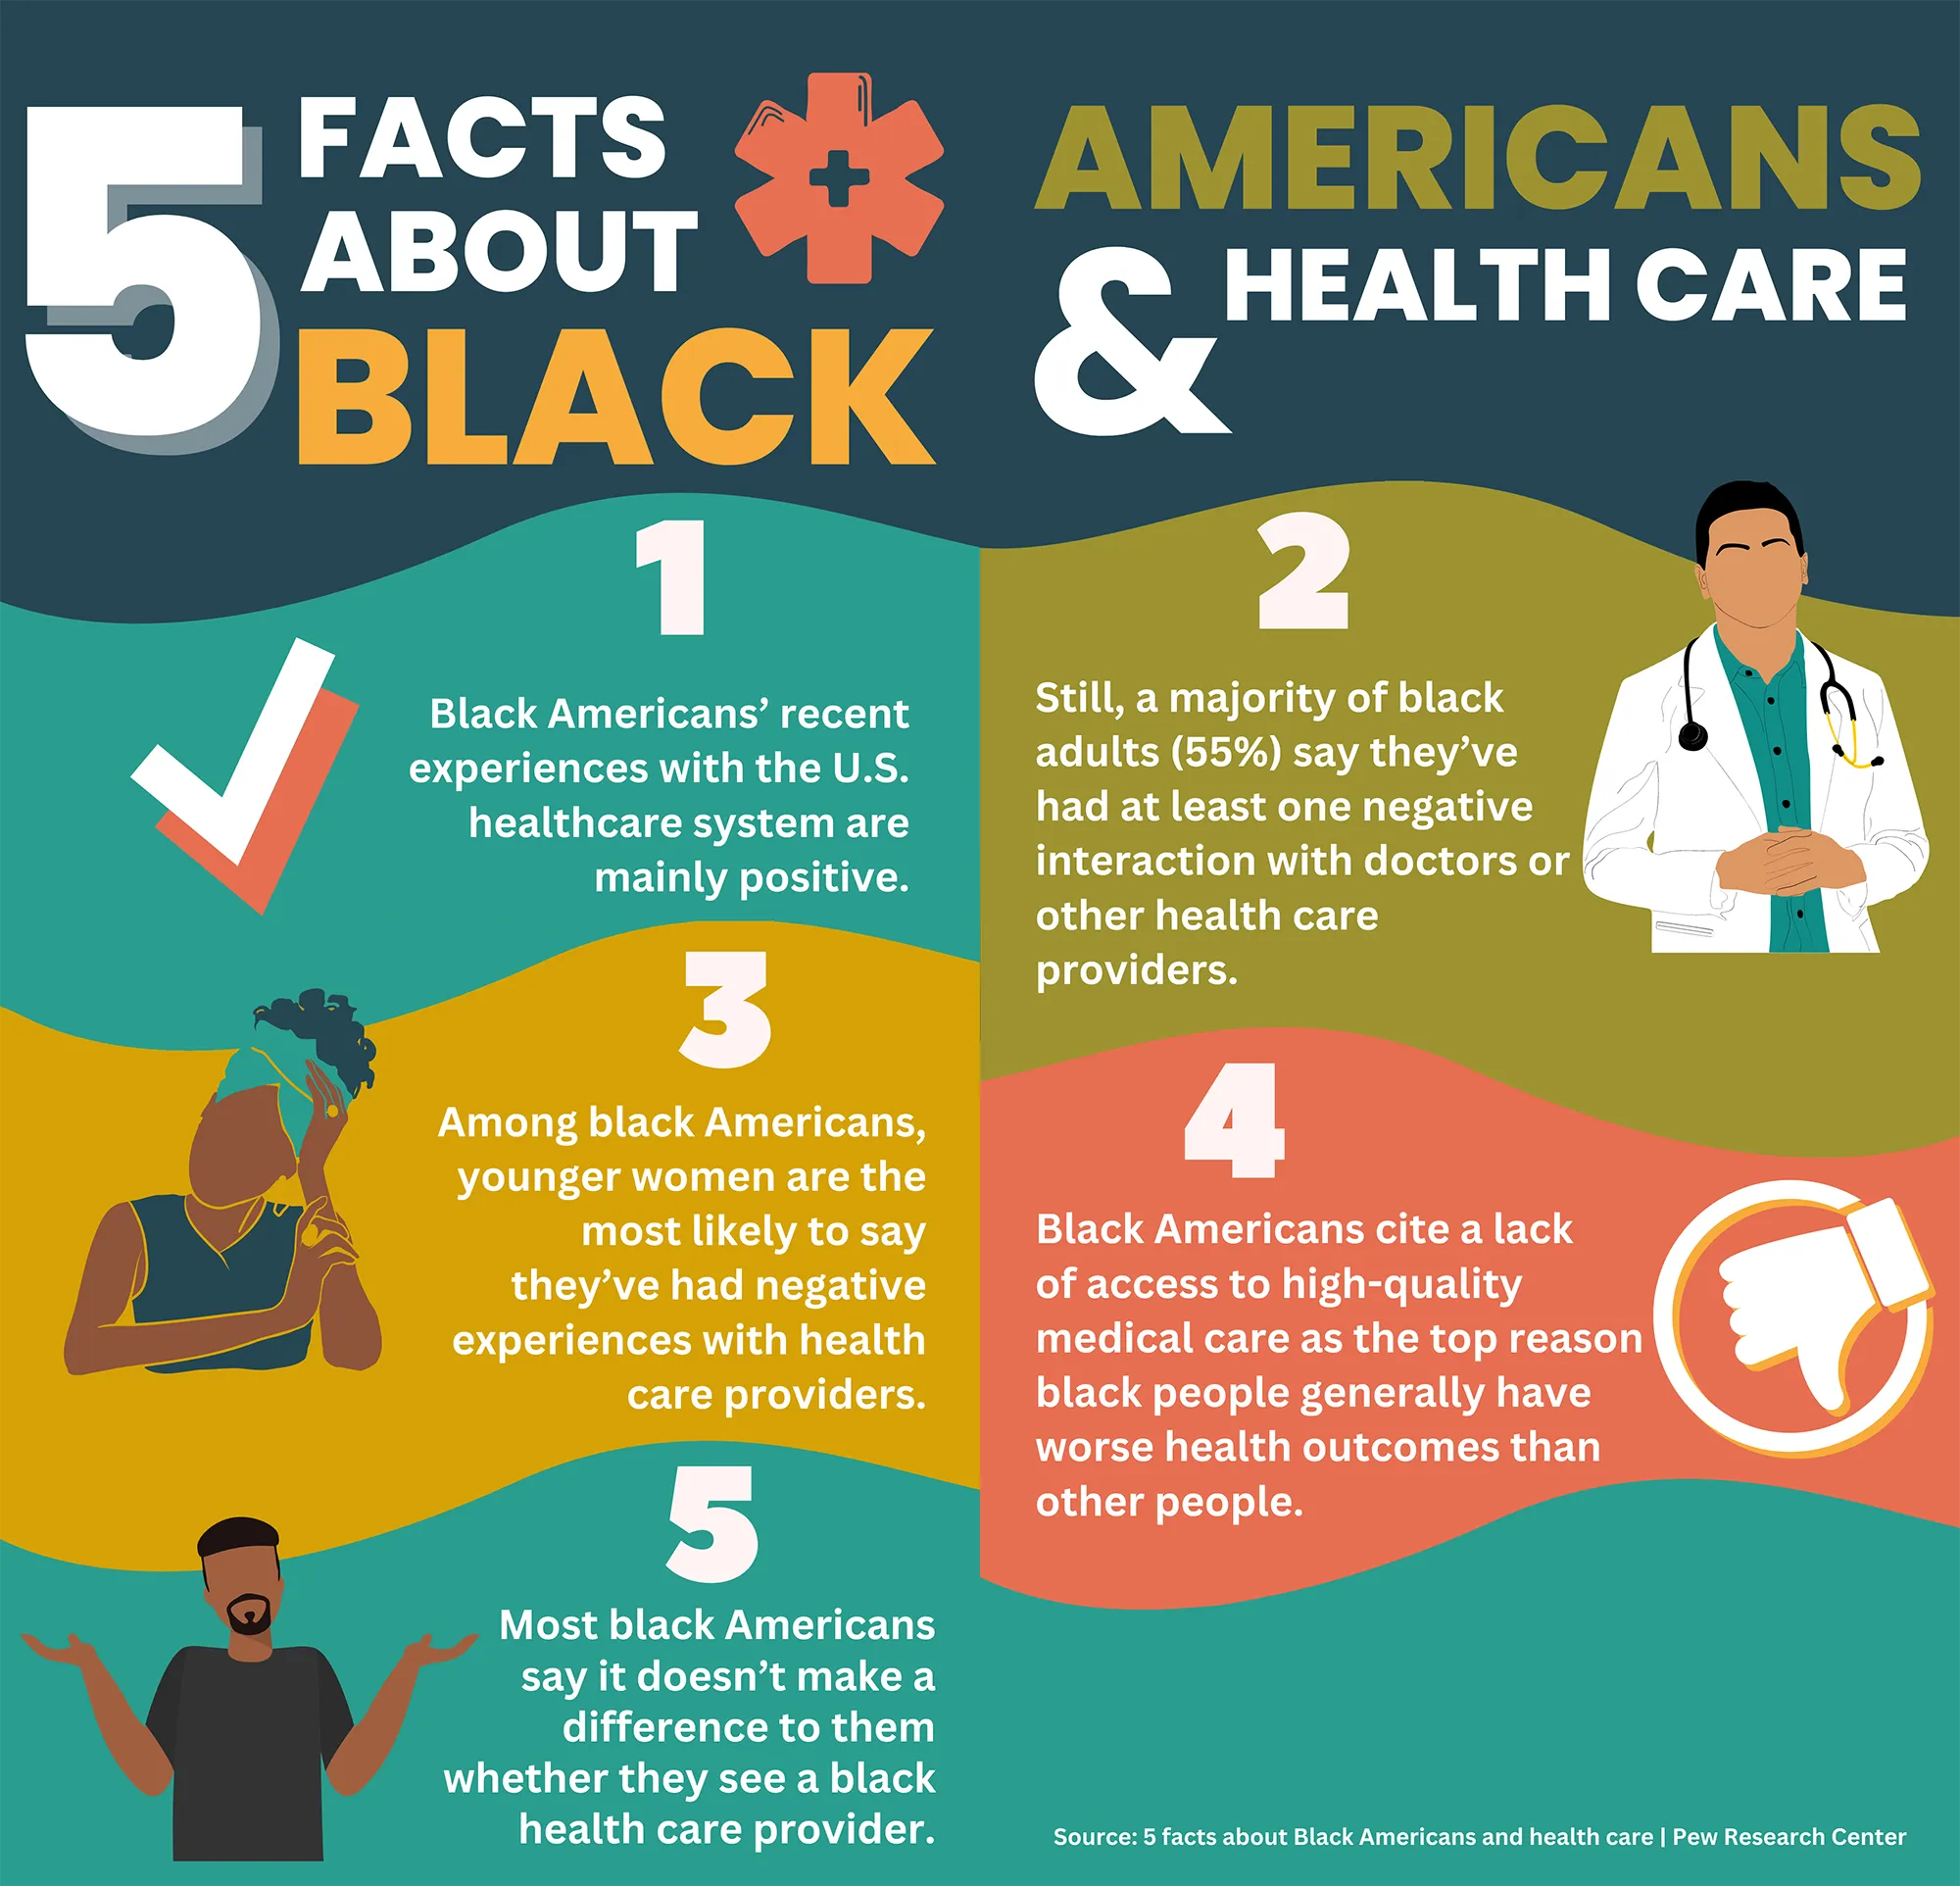 5 Facts About Black Americans & Healthcare